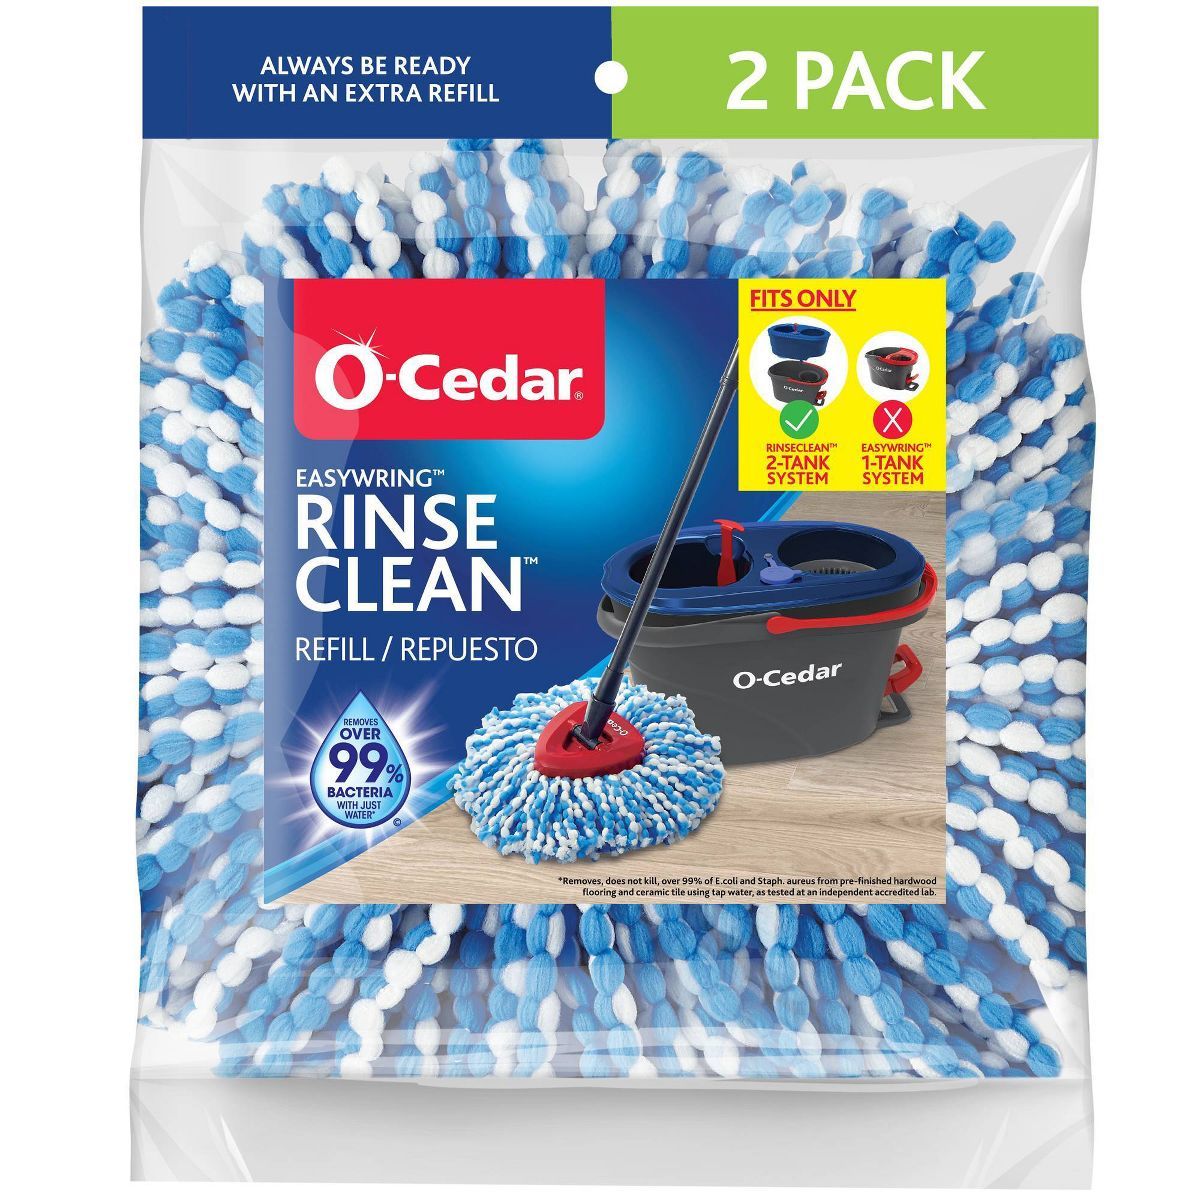 O-Cedar EasyWring RinseClean Mop Refill | Target